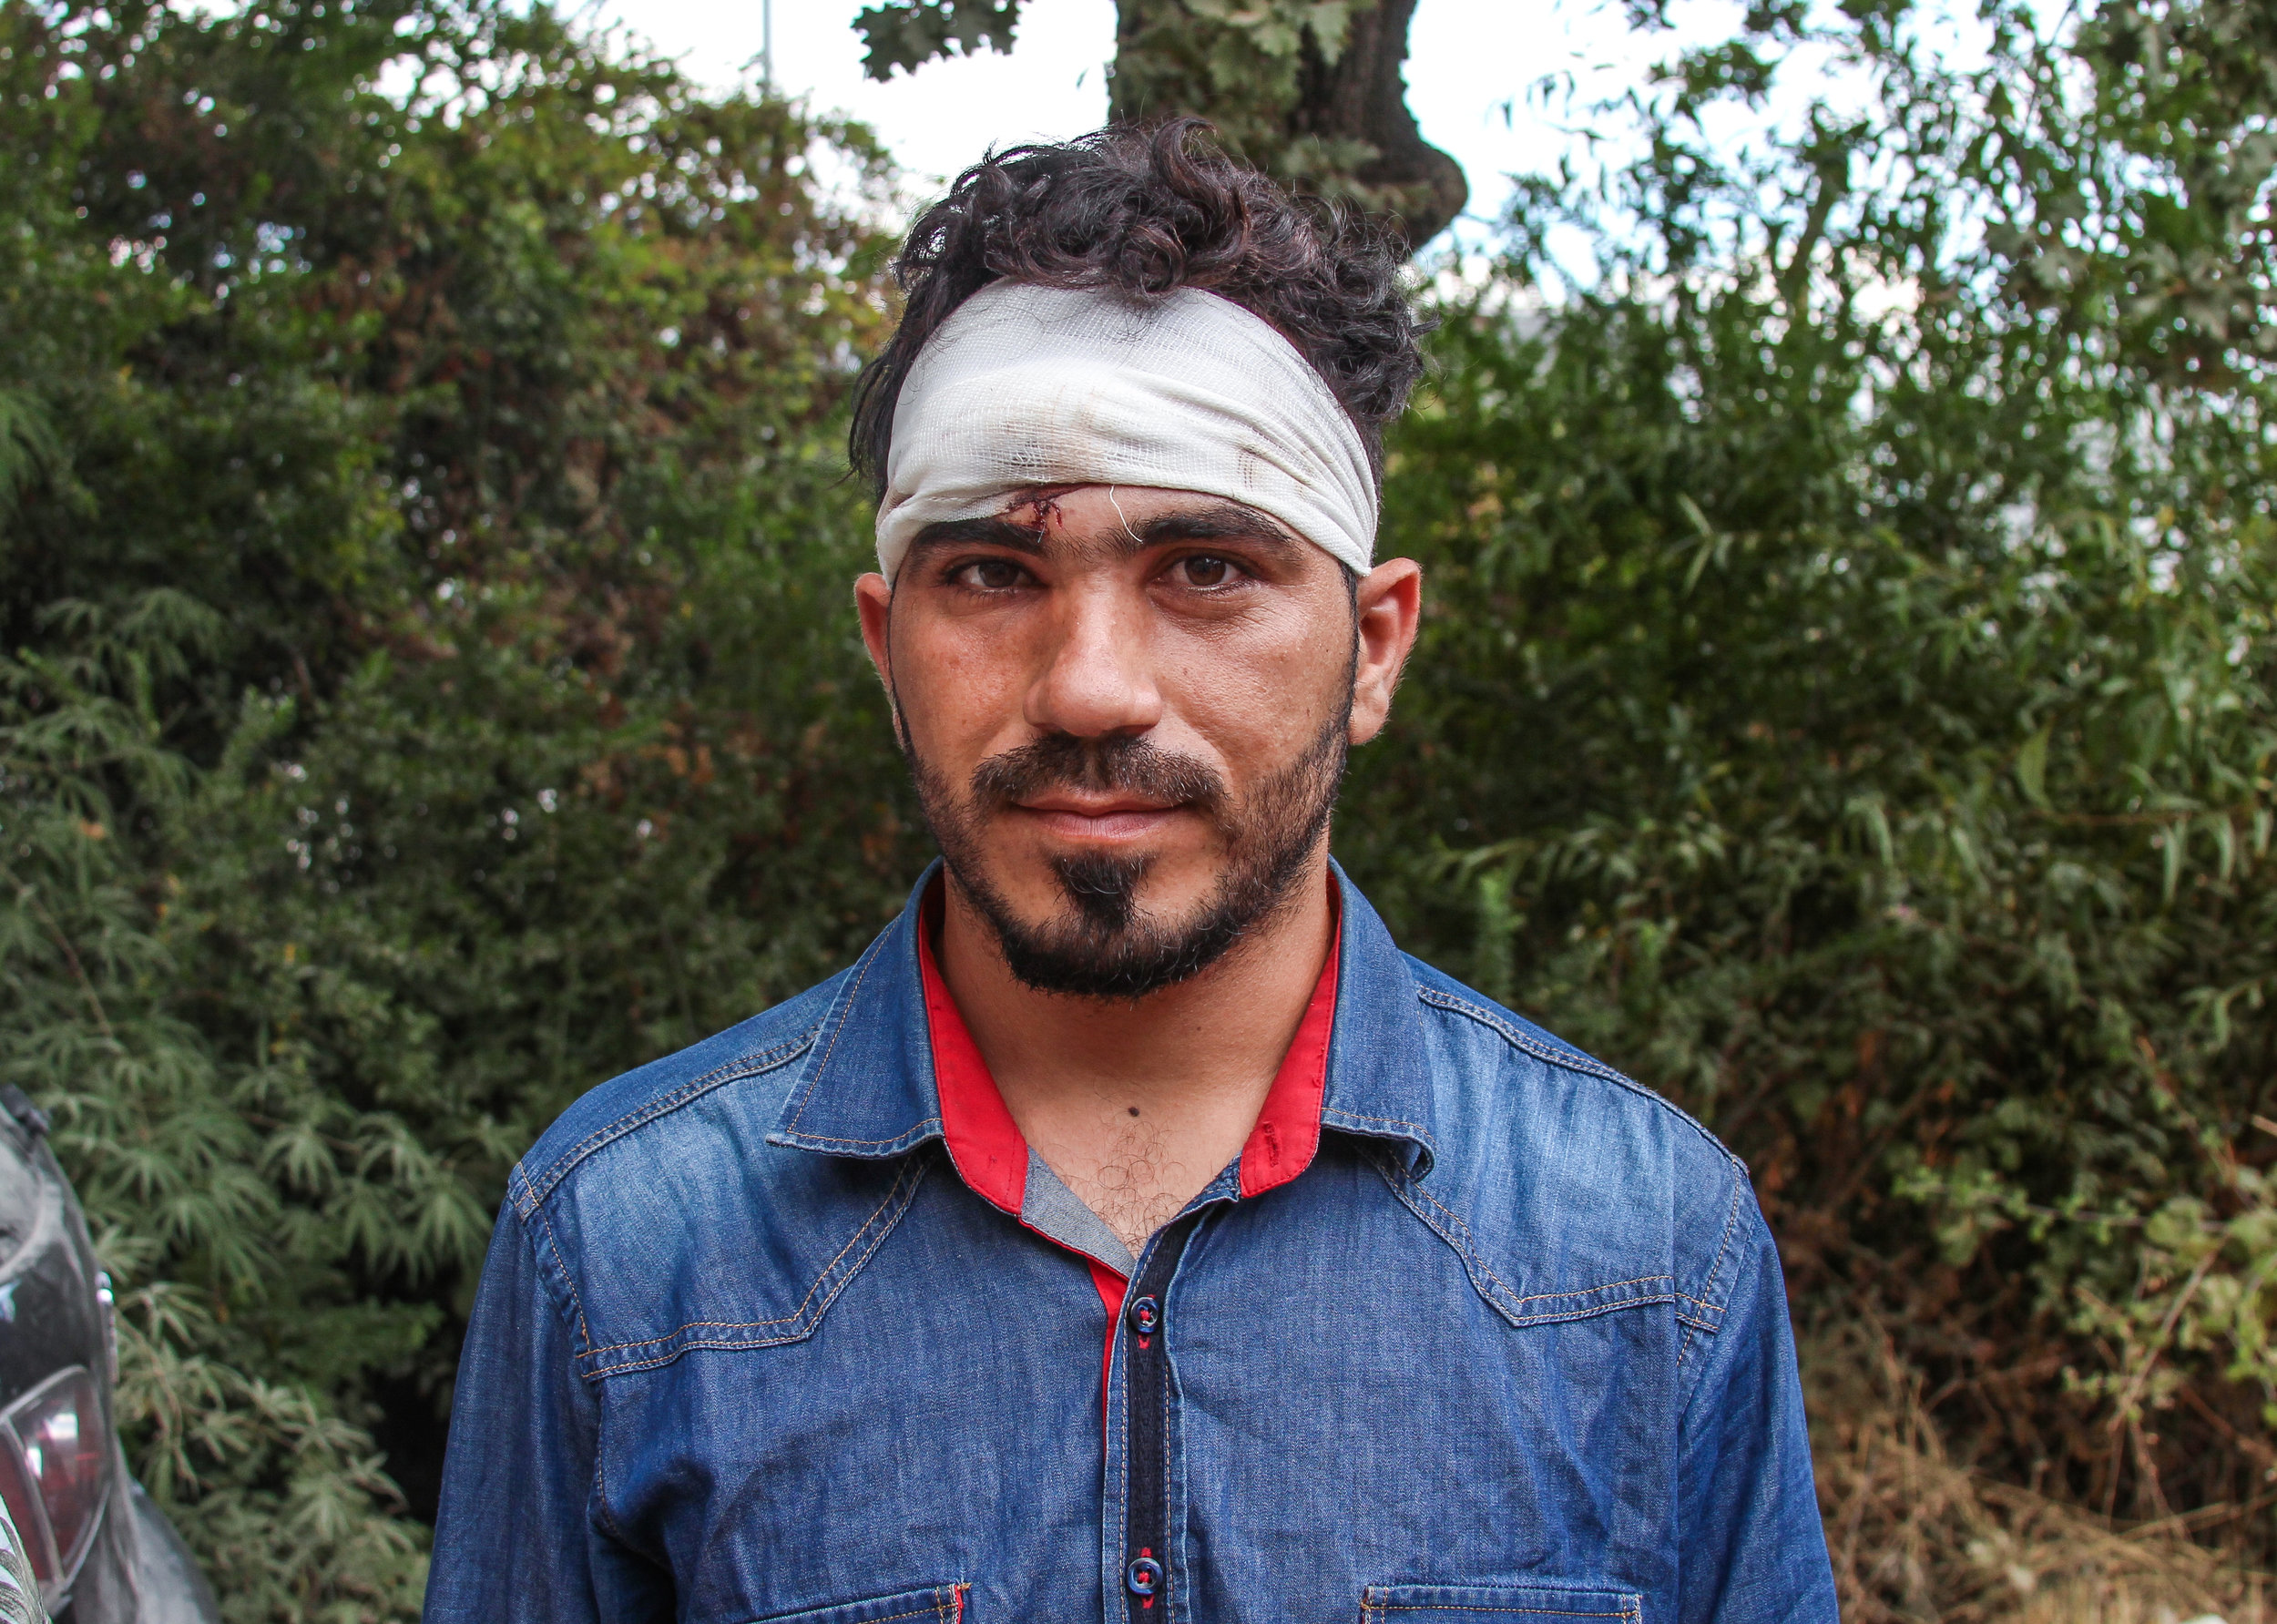  A Syrian migrant sports fresh bandages after allegedly being beaten by Greek police in the Moria Refugee Camp. Countless others were also injured in a riot that destroyed over 60% of the facility. The riots were initiated by refugees due to internal